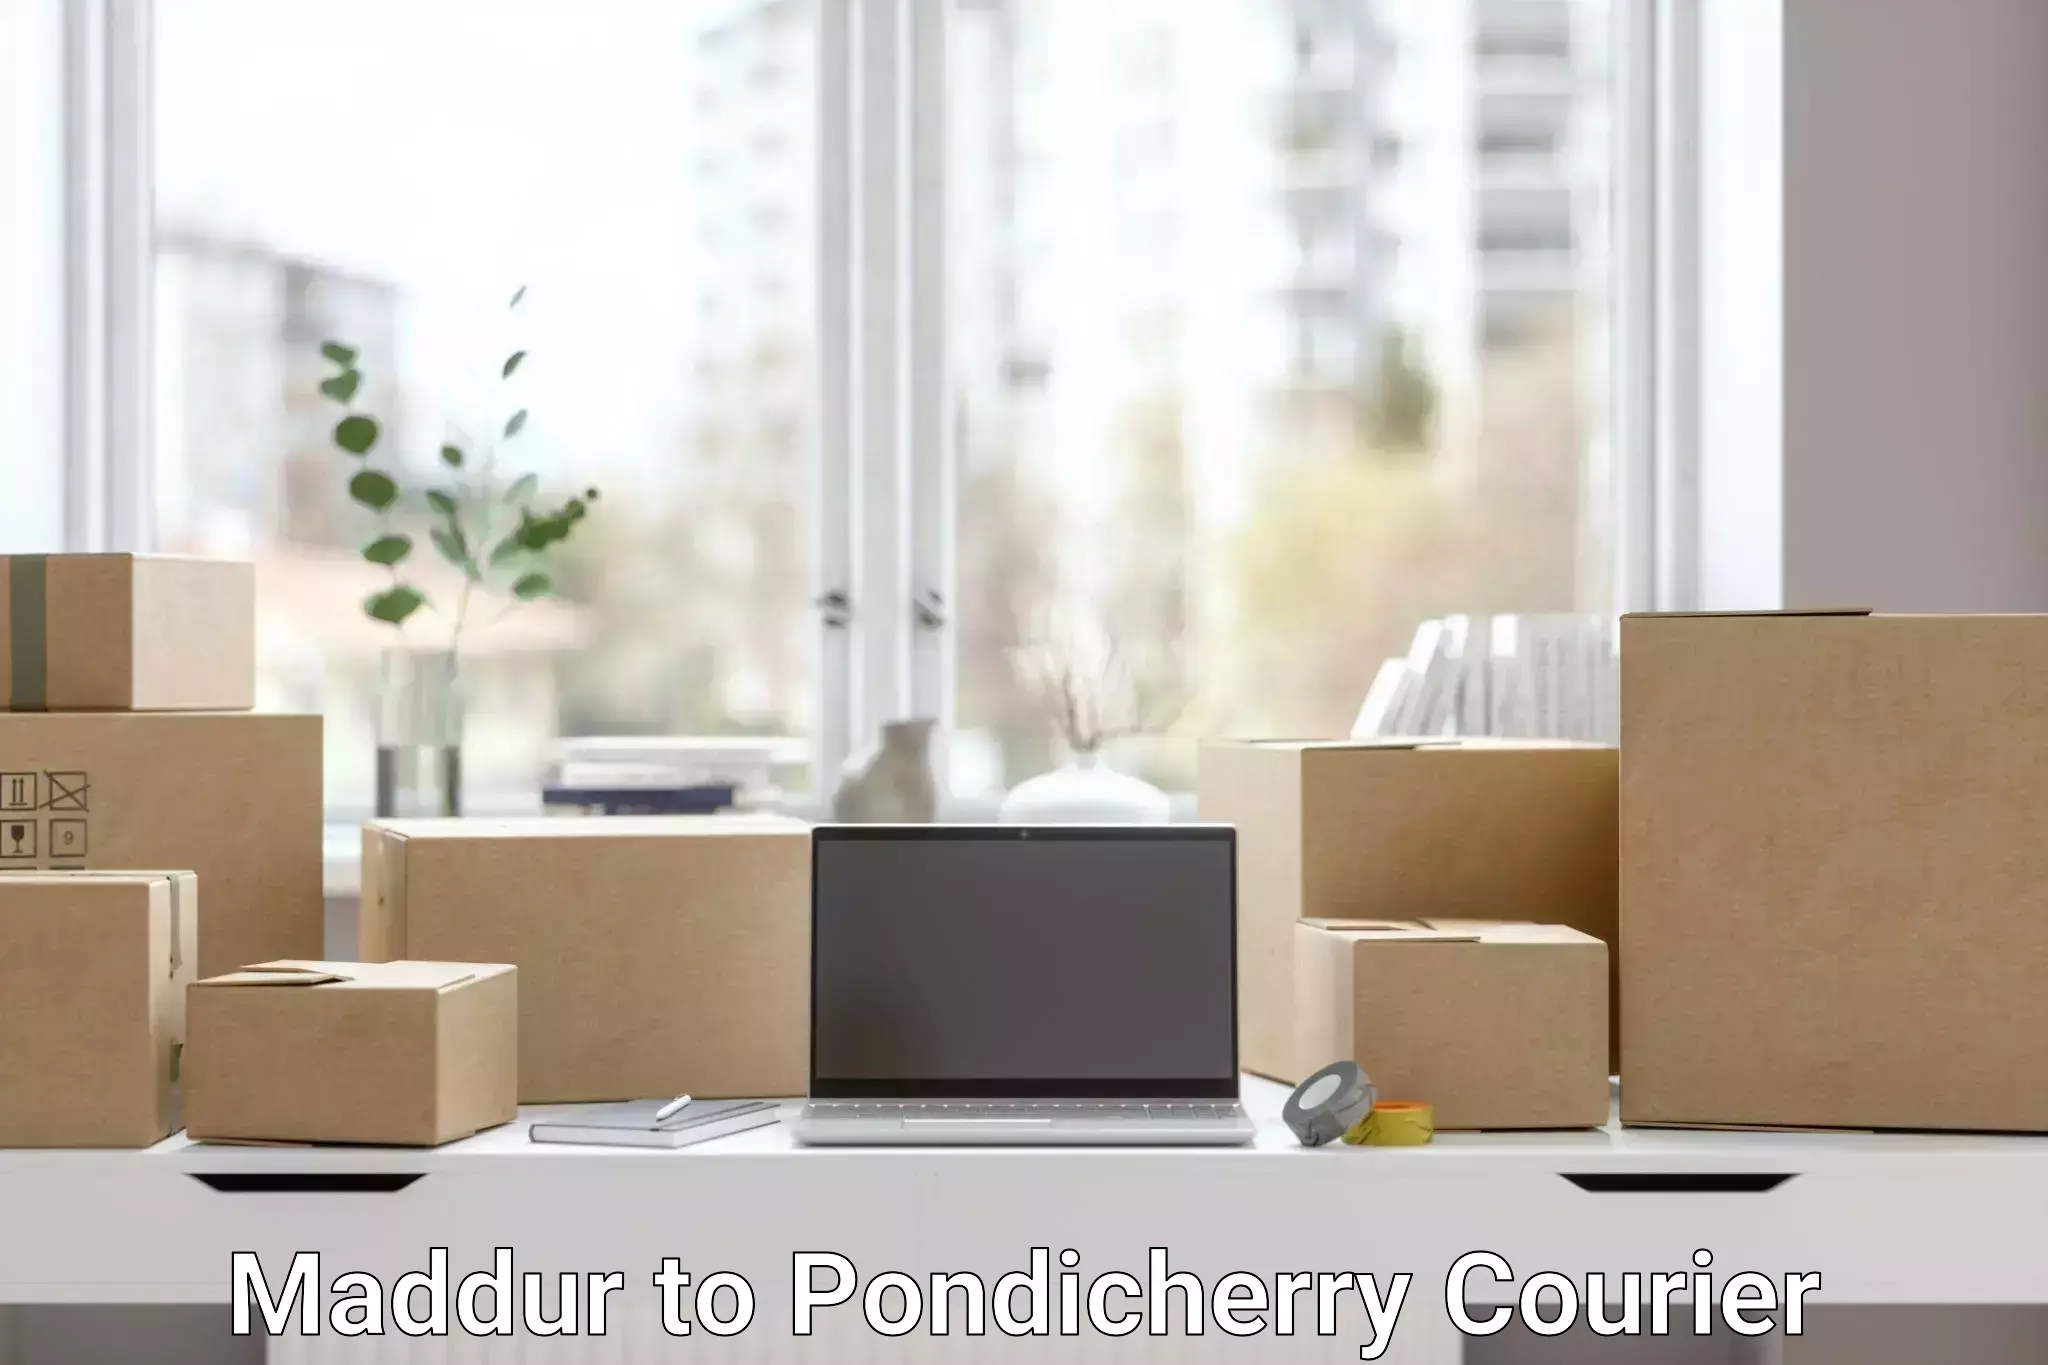 Customizable delivery plans Maddur to Pondicherry